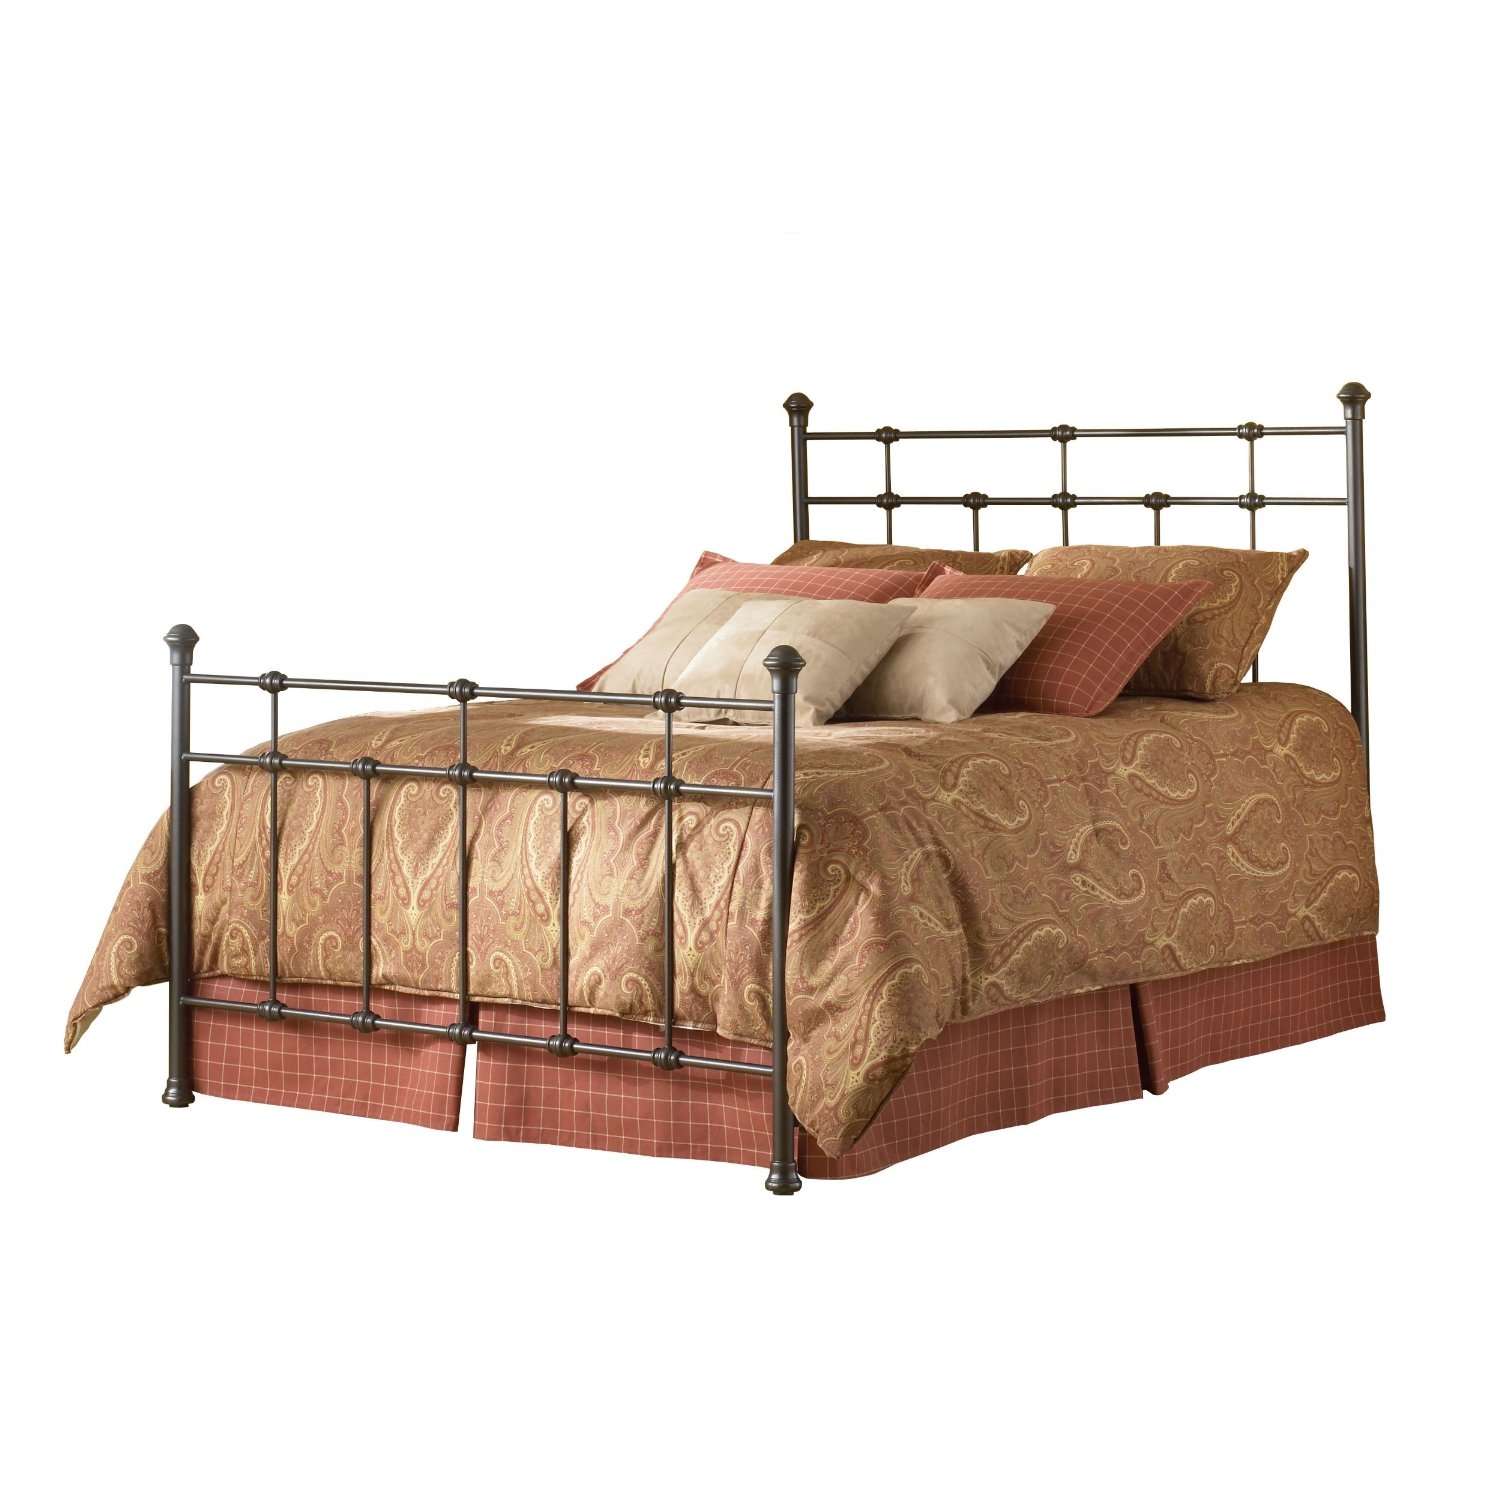 King size Metal Bed with Headboard and Footboard in Hammered Brown Finish